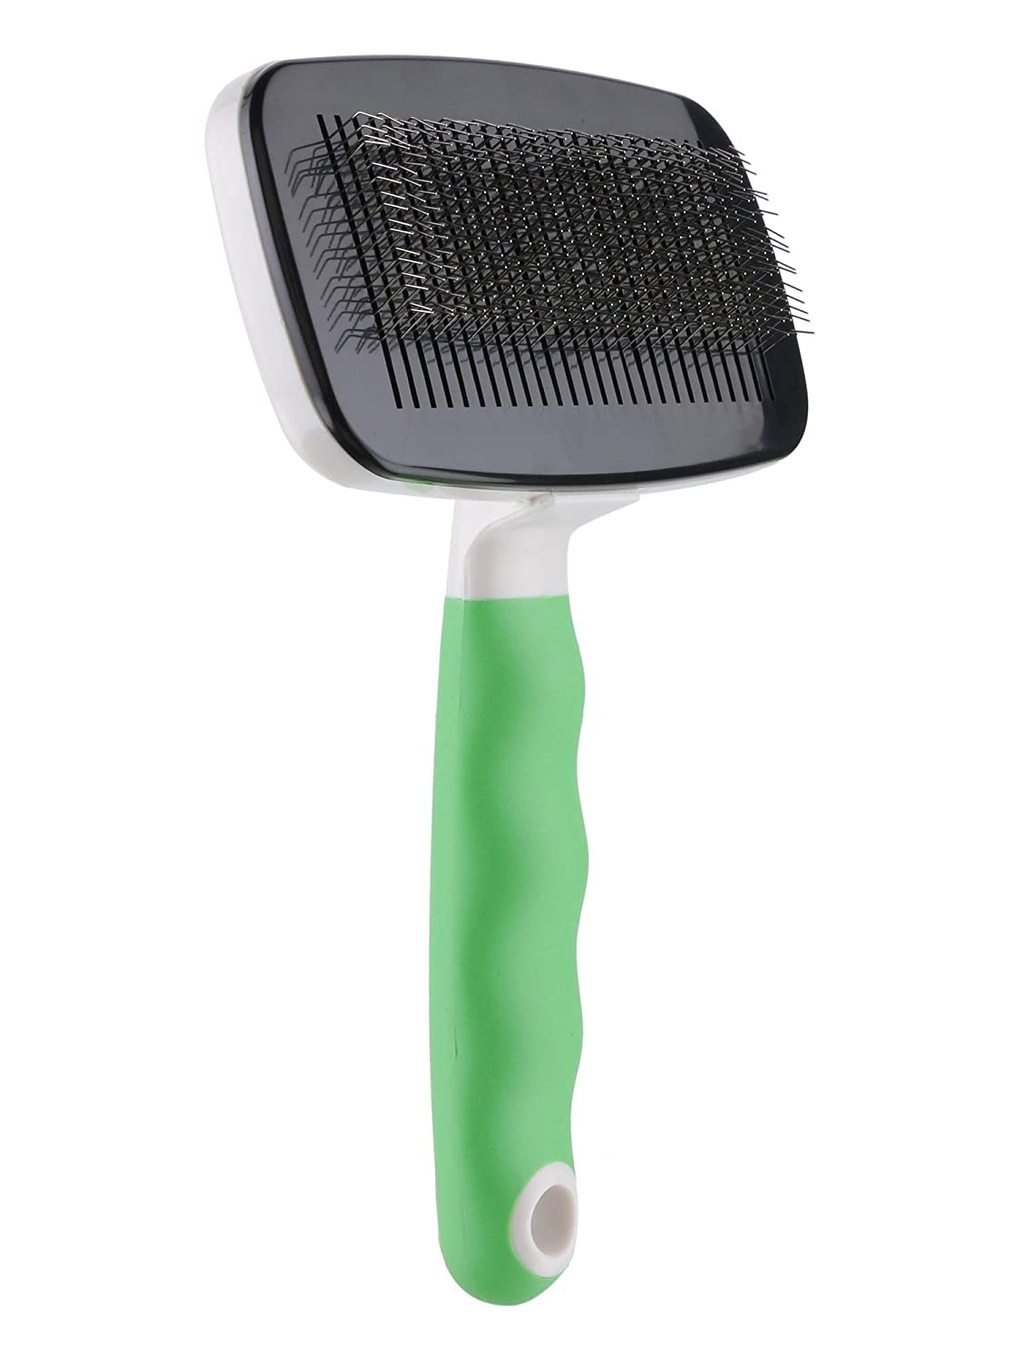 wahl cleaning brush